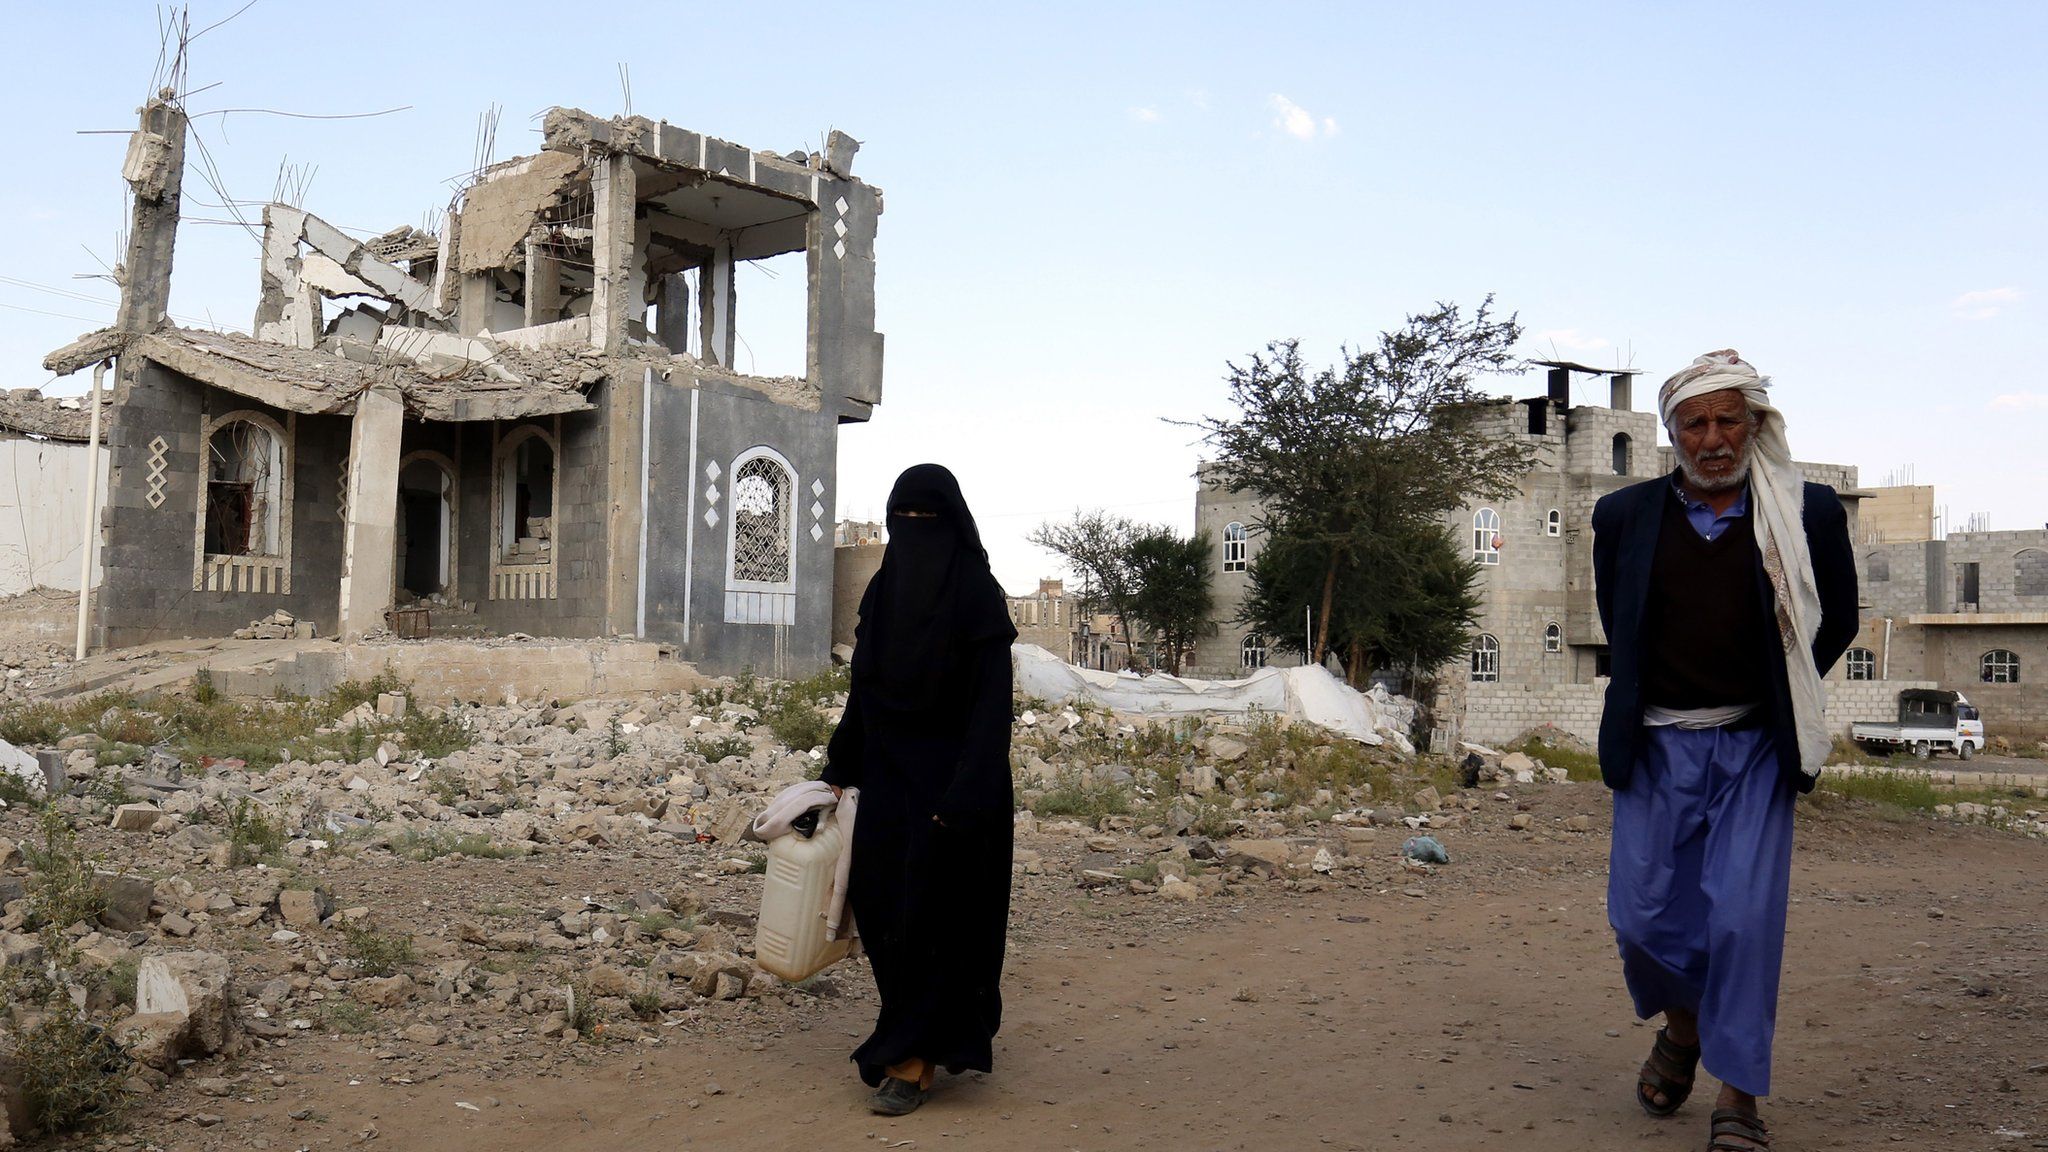 Yemenis walk past a destroyed building allegedly targeted by a previous Saudi-led airstrike, in Sana"a, Yemen, 08 December 2018.